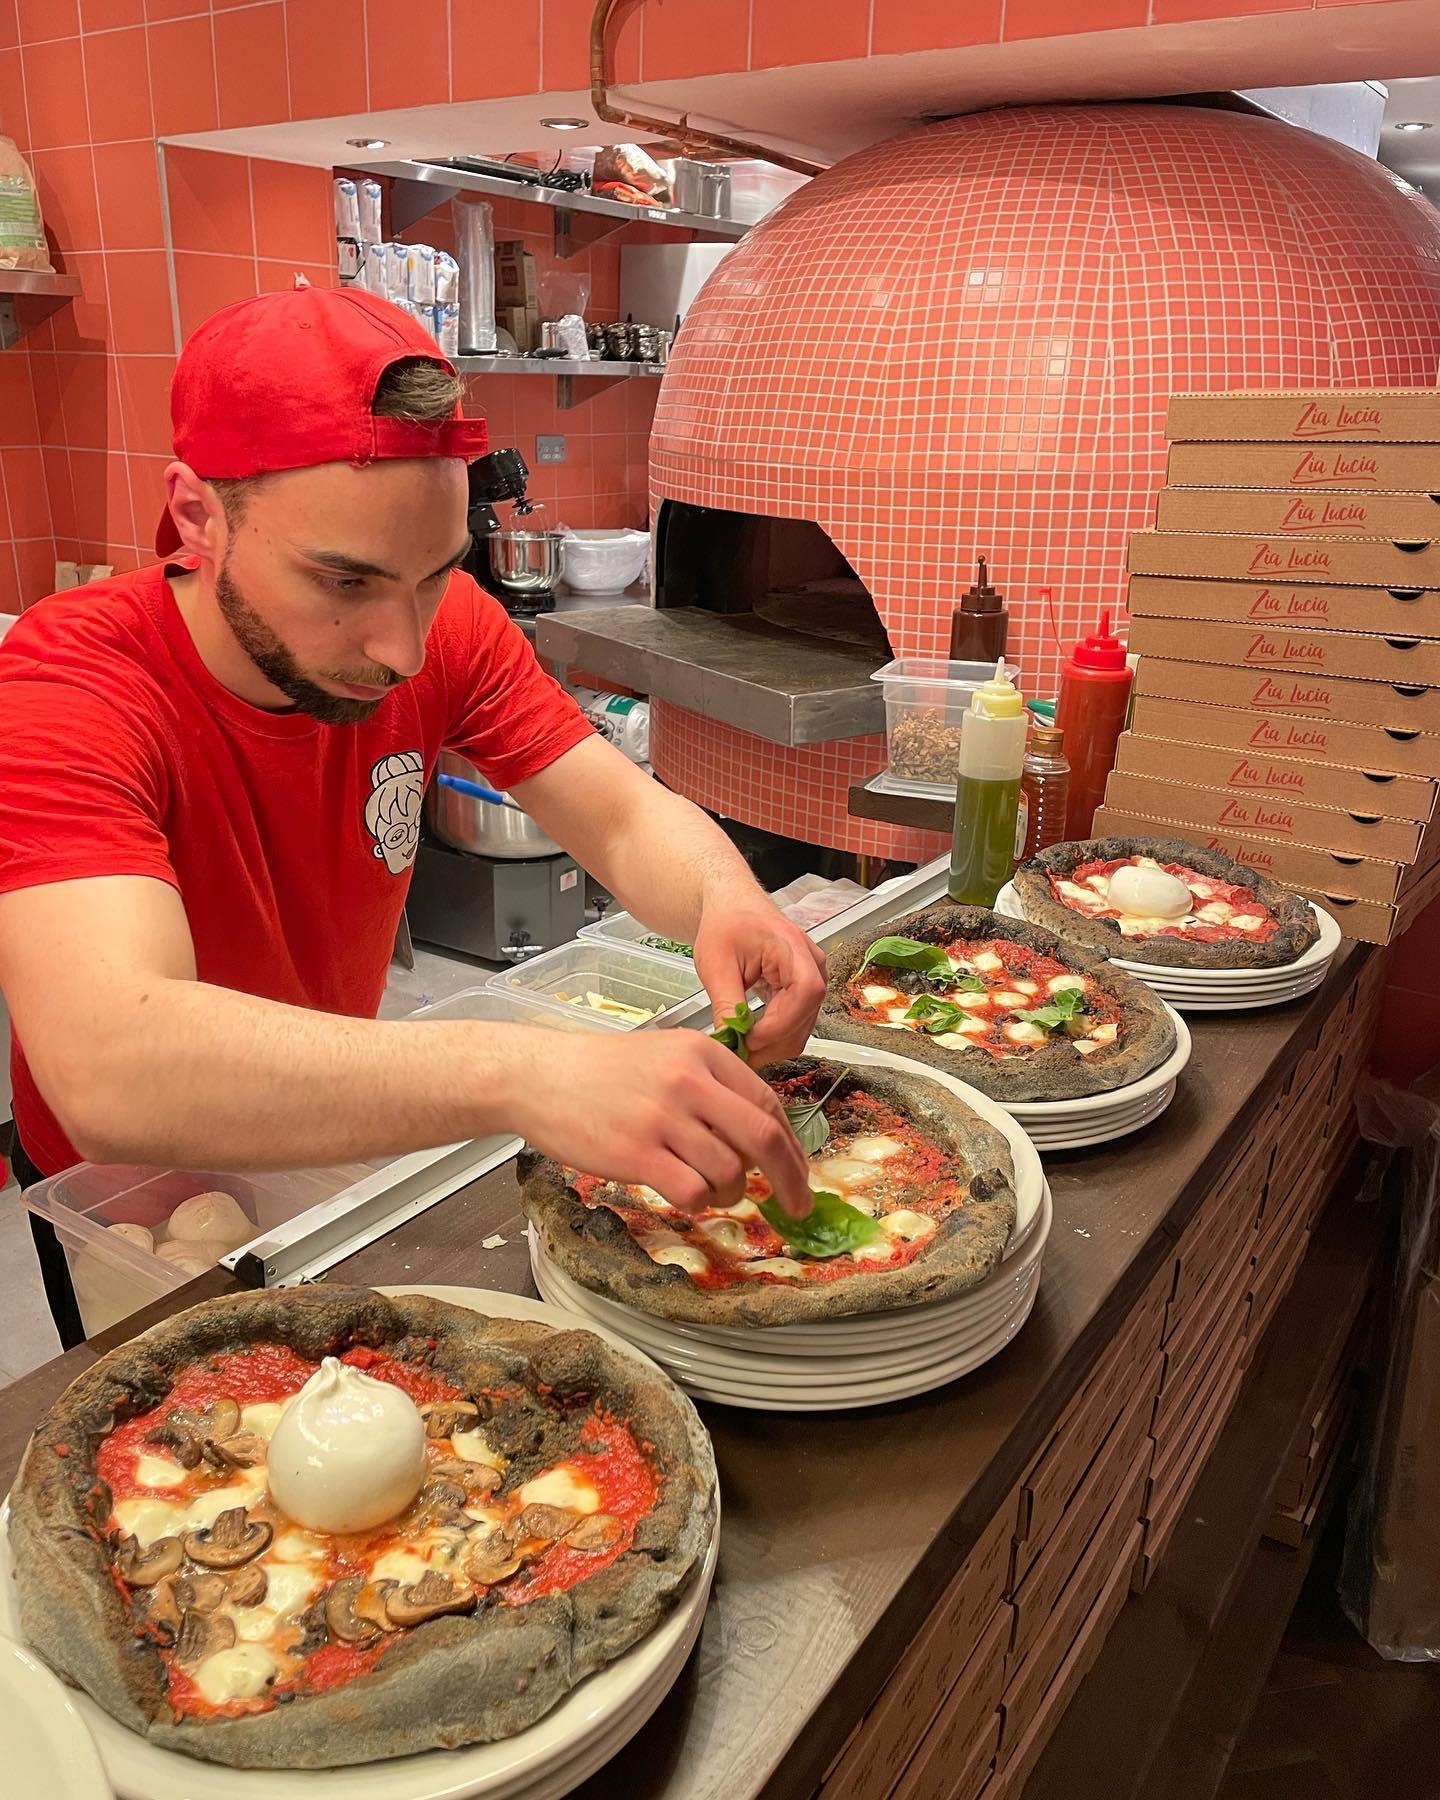 Chef at Zia Lucia putting the final ingredients onto 4 pizzas